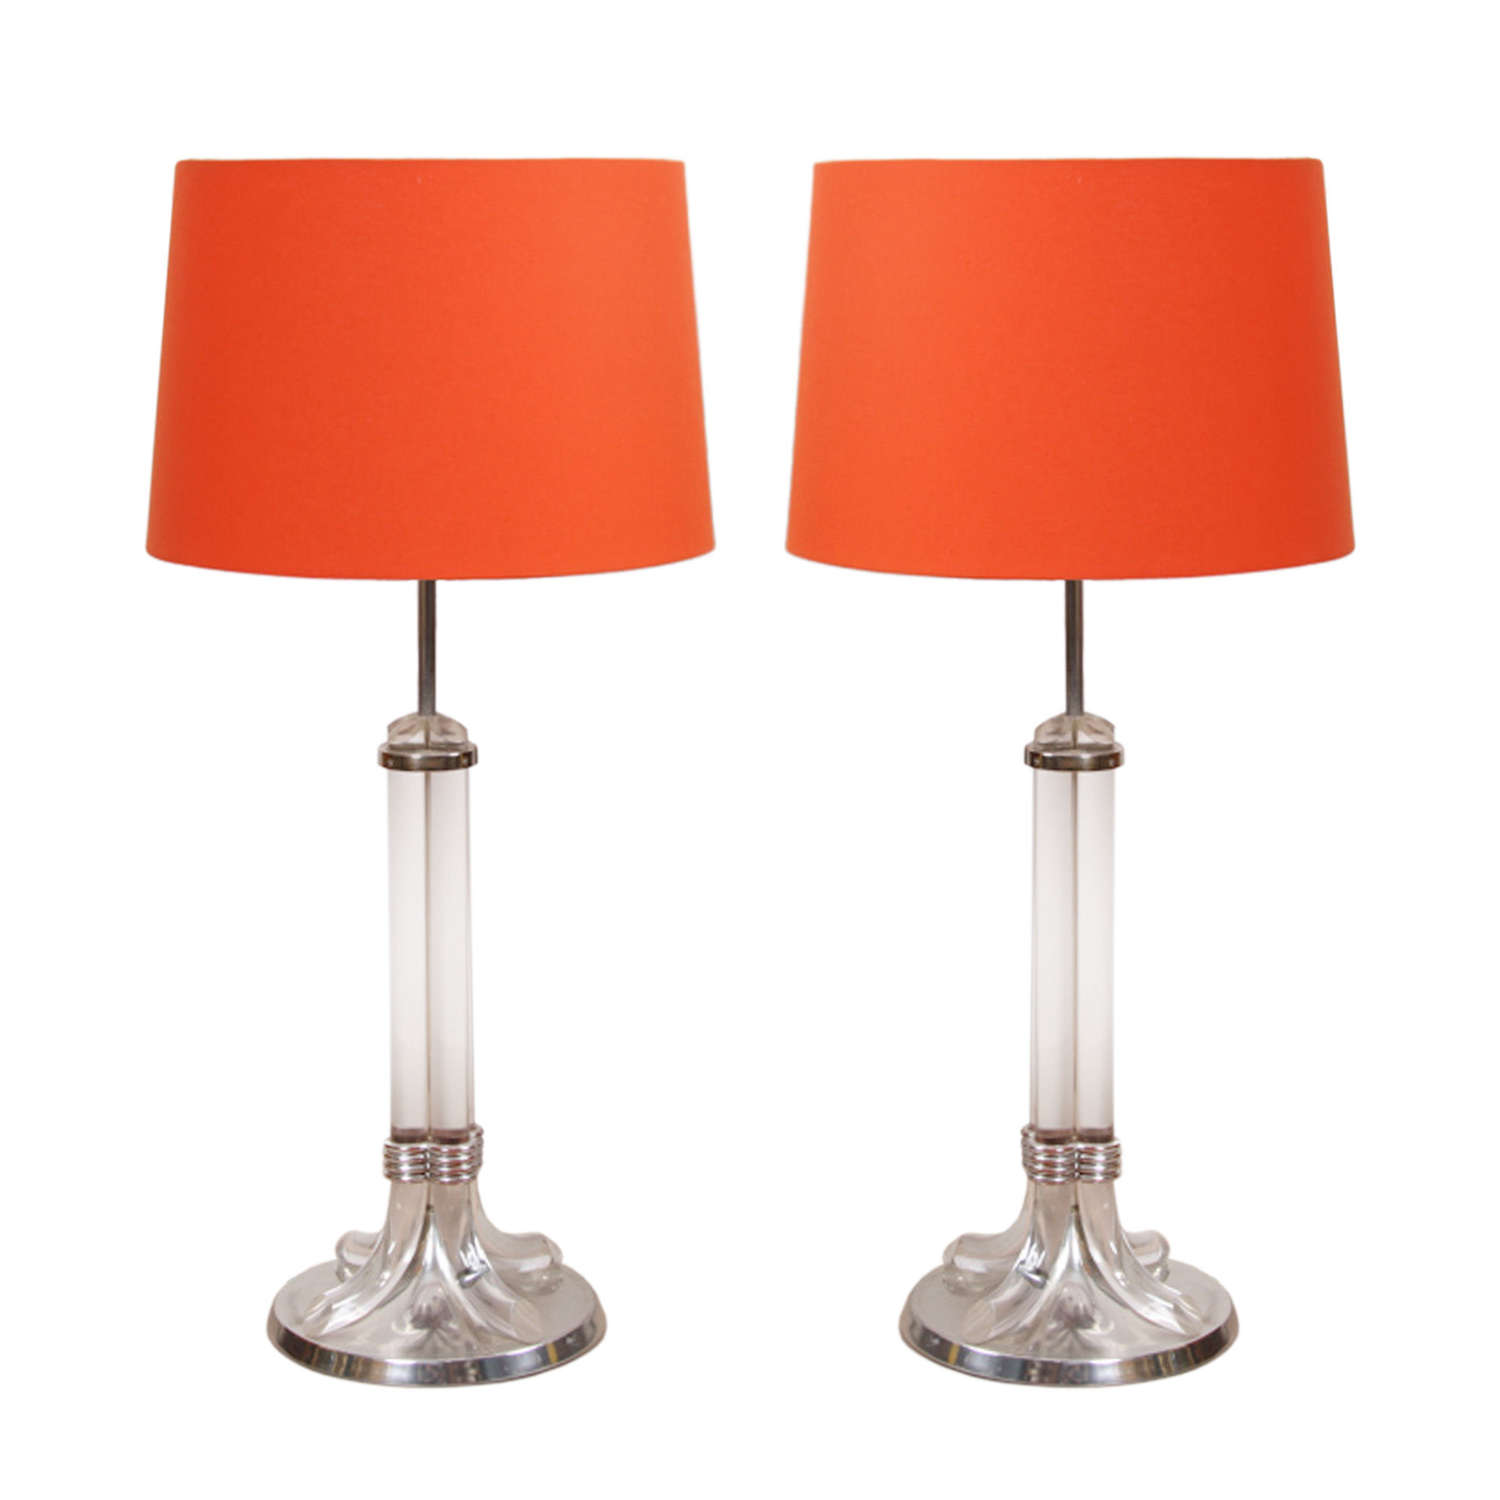 Large 1970s French Lucite and Nickel Table Lamps